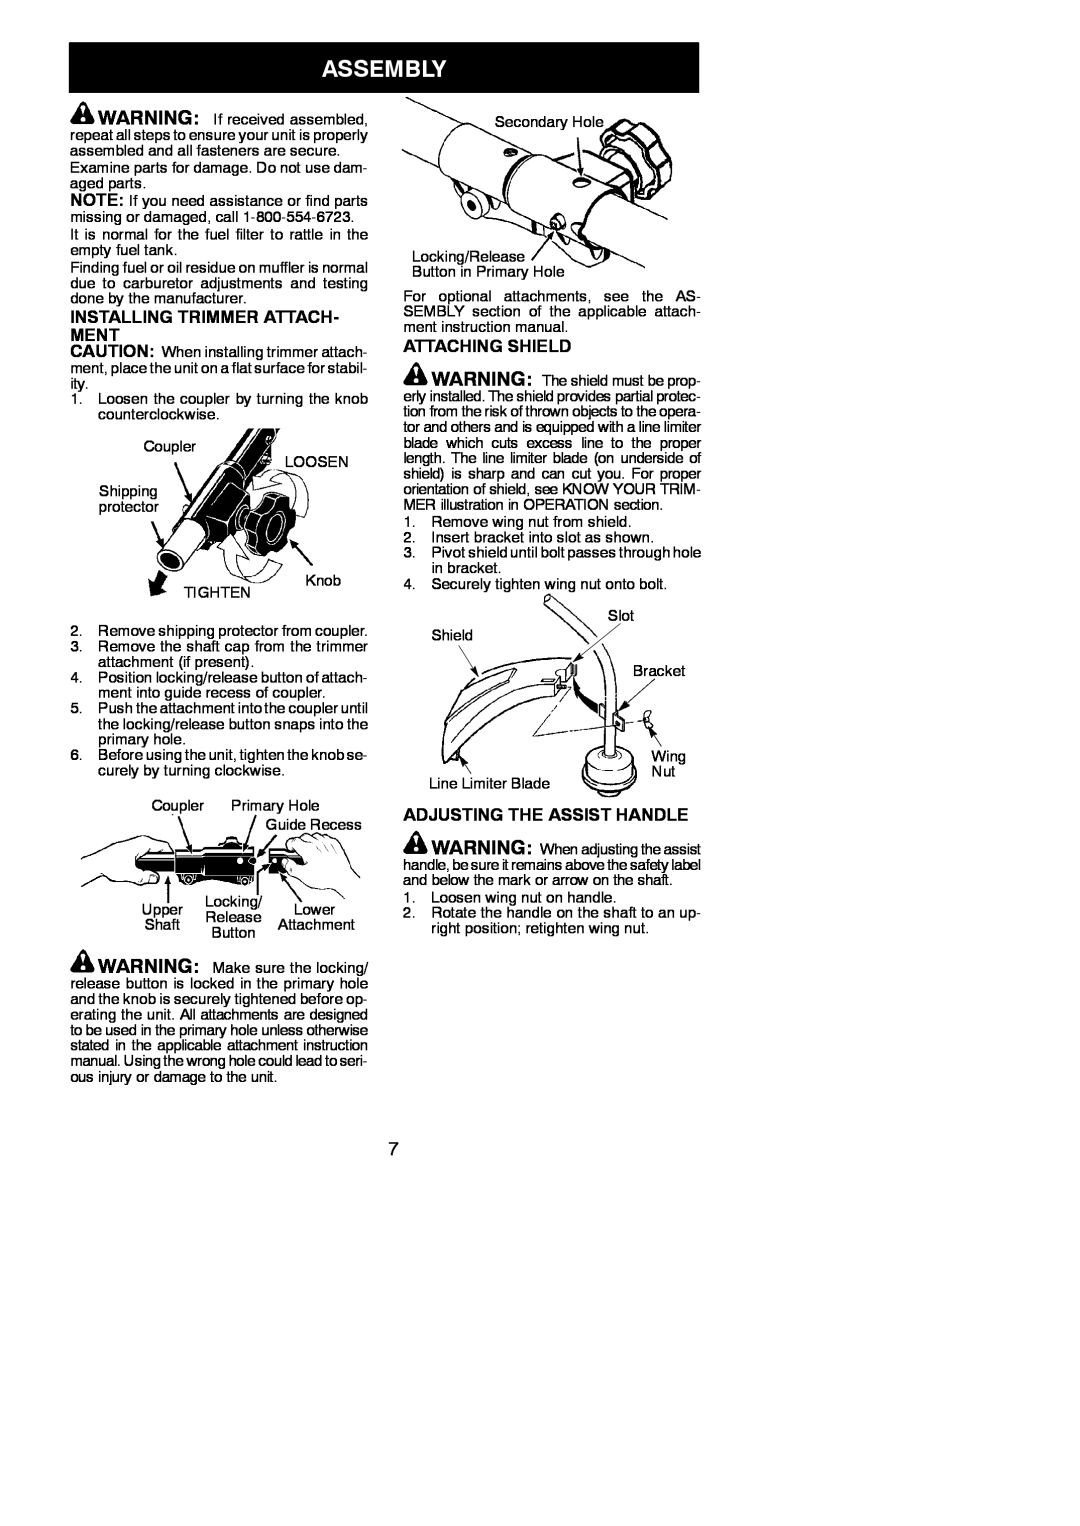 Poulan 545146926 Assembly, Installing Trimmer Attach- Ment, Attaching Shield, Adjusting The Assist Handle 